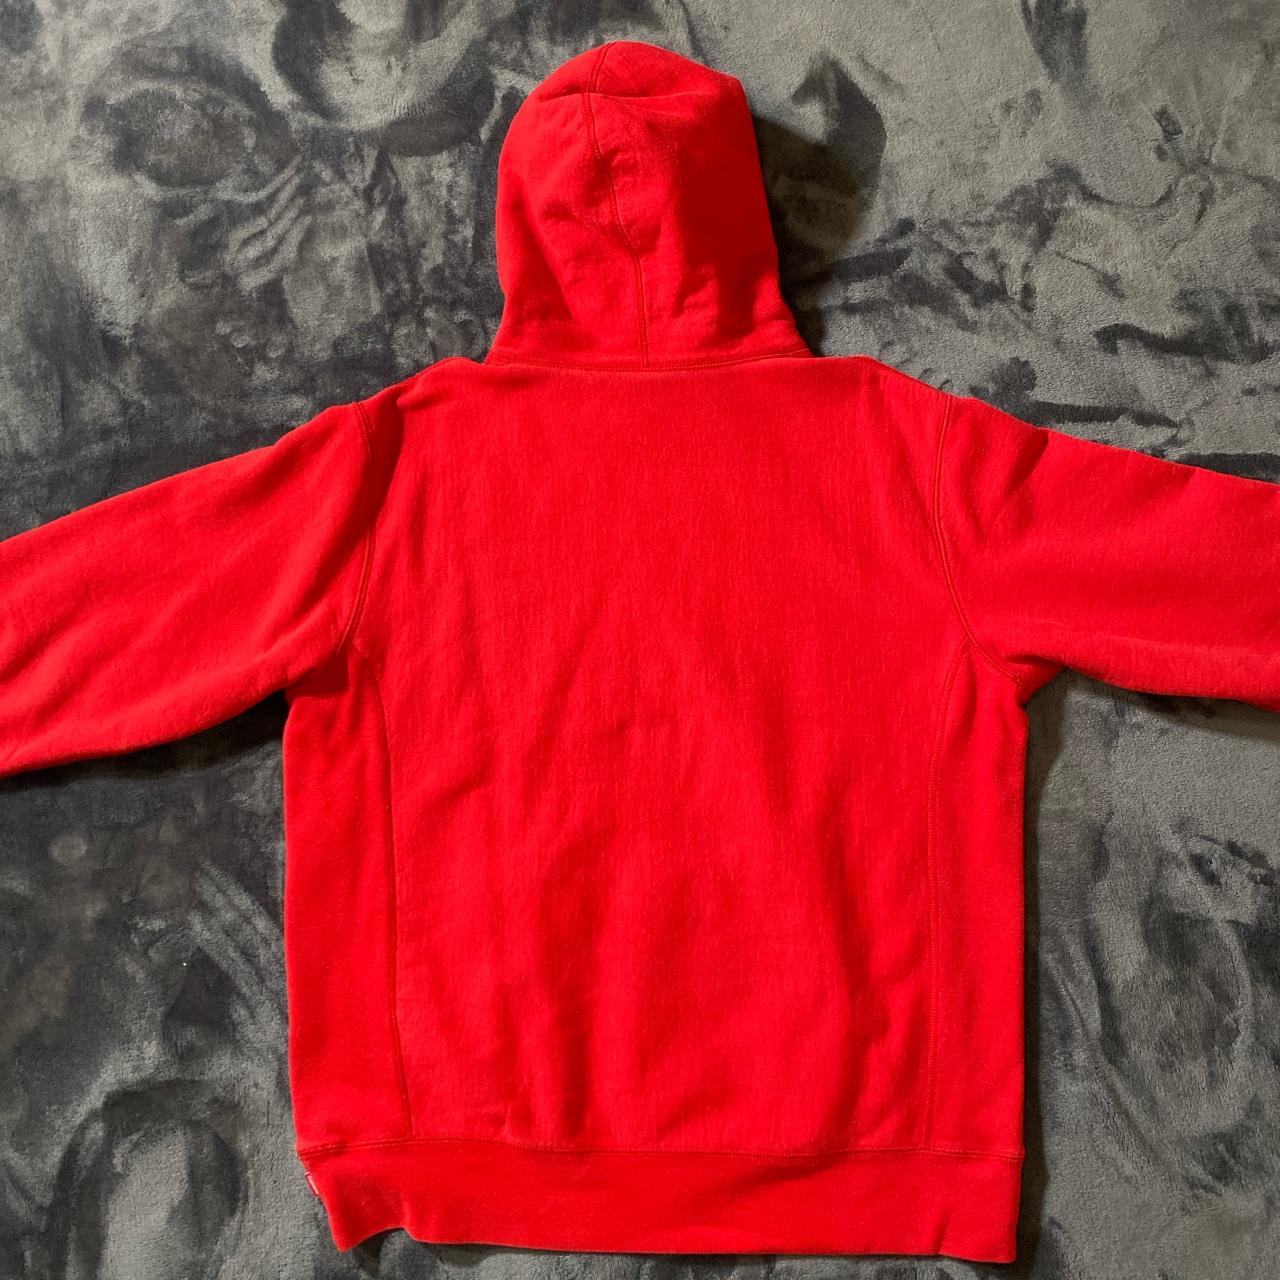 New #Supreme Script hoodie red size small available now in store